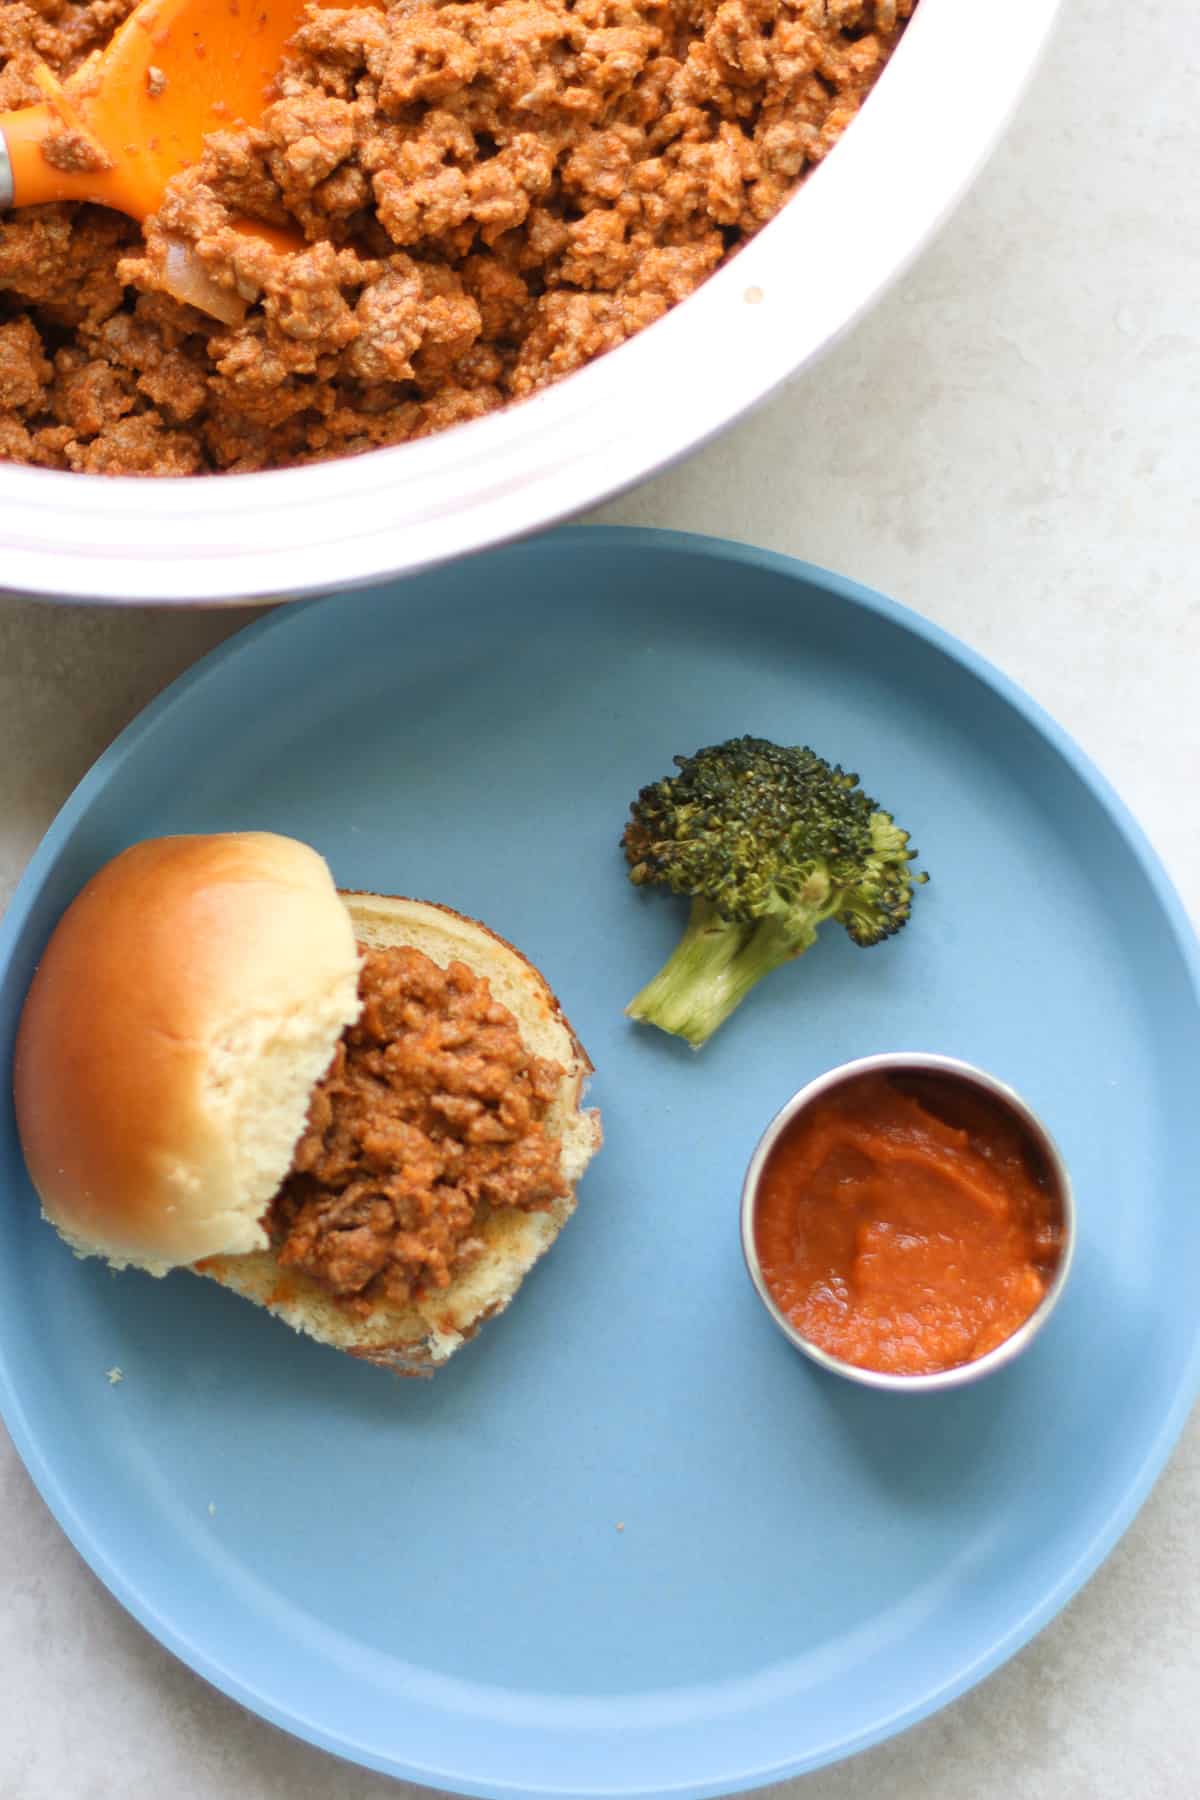 Mini sloppy joes with broccoli and a side of the sauce.